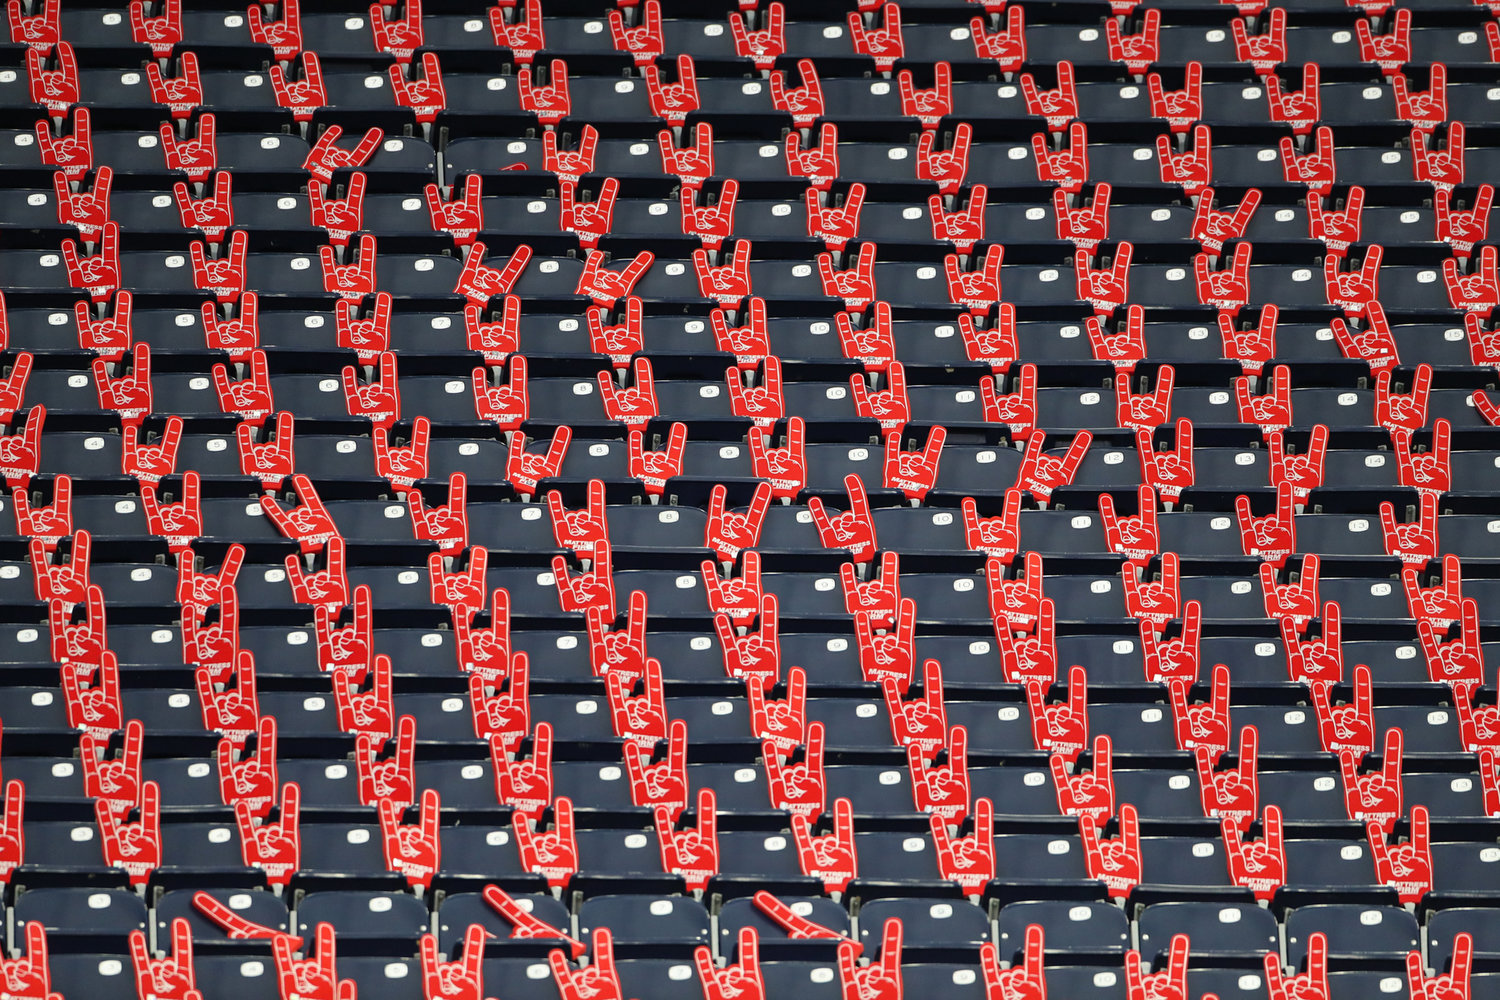 A section of empty seats with foam hands for fans before the start of an NFL game between the Houston Texans and the New York Jets on November 28, 2021 in Houston, Texas.